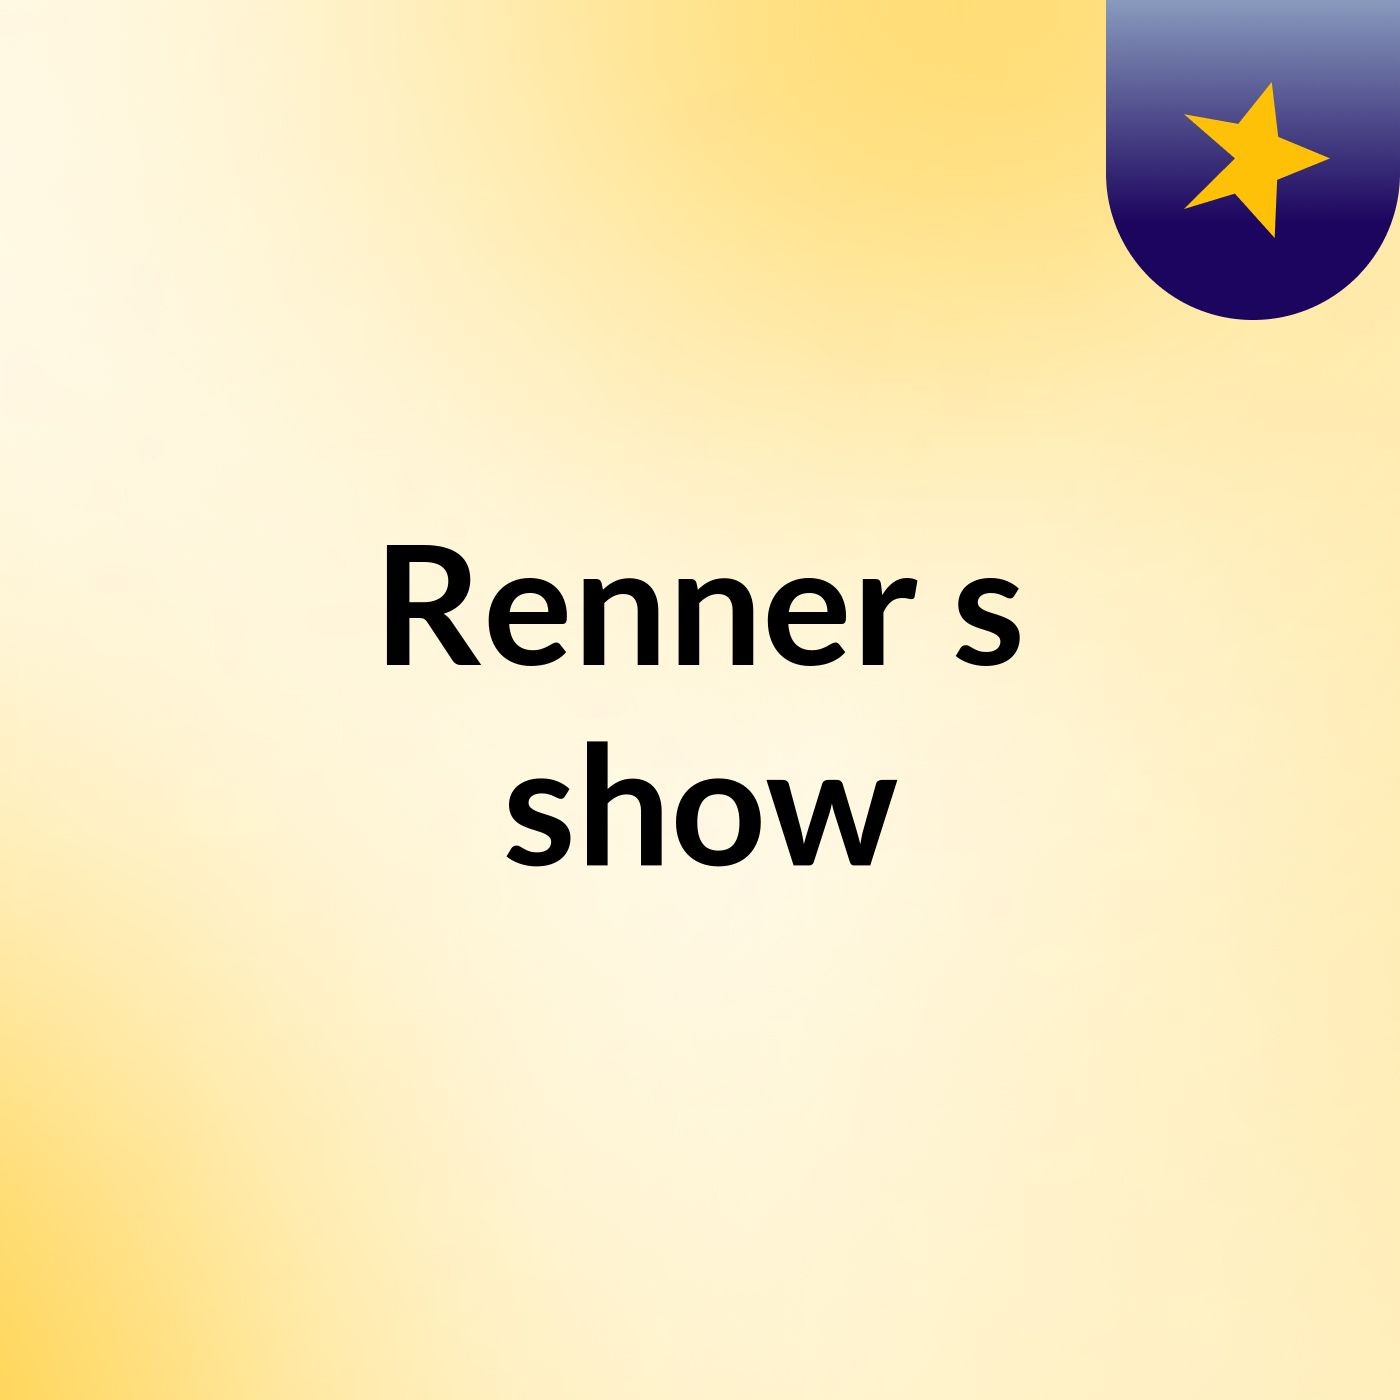 Renner's show